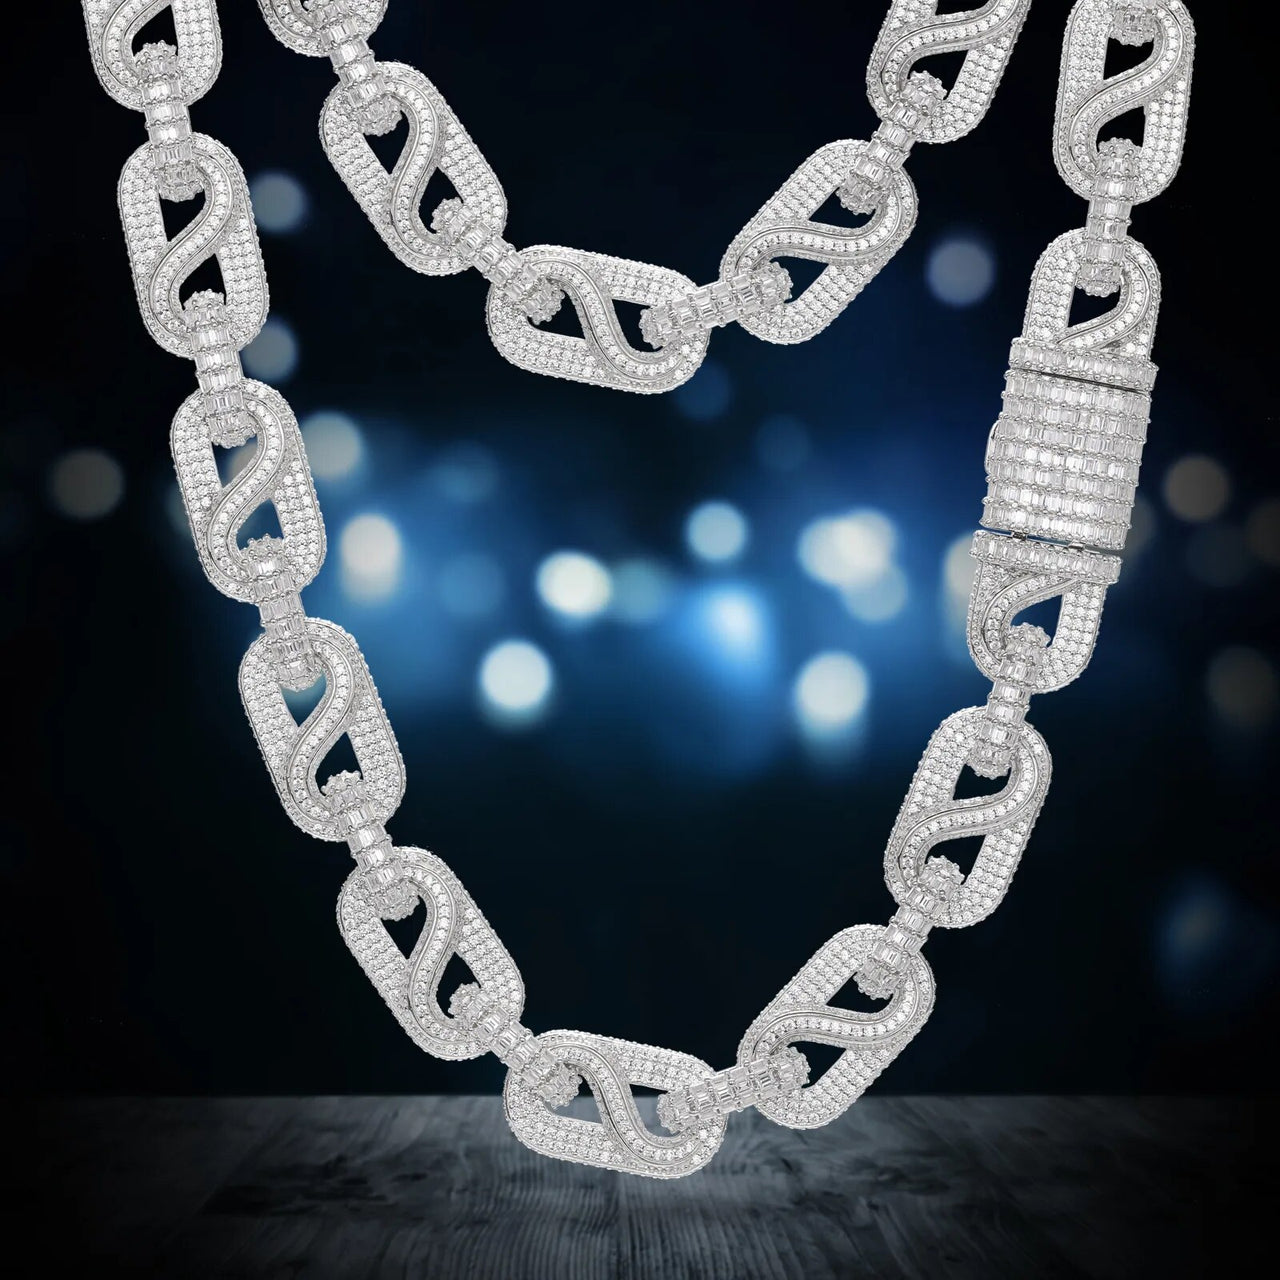 14mm S925 Moissanite Infinity Mariner Link Chain - Different Drips